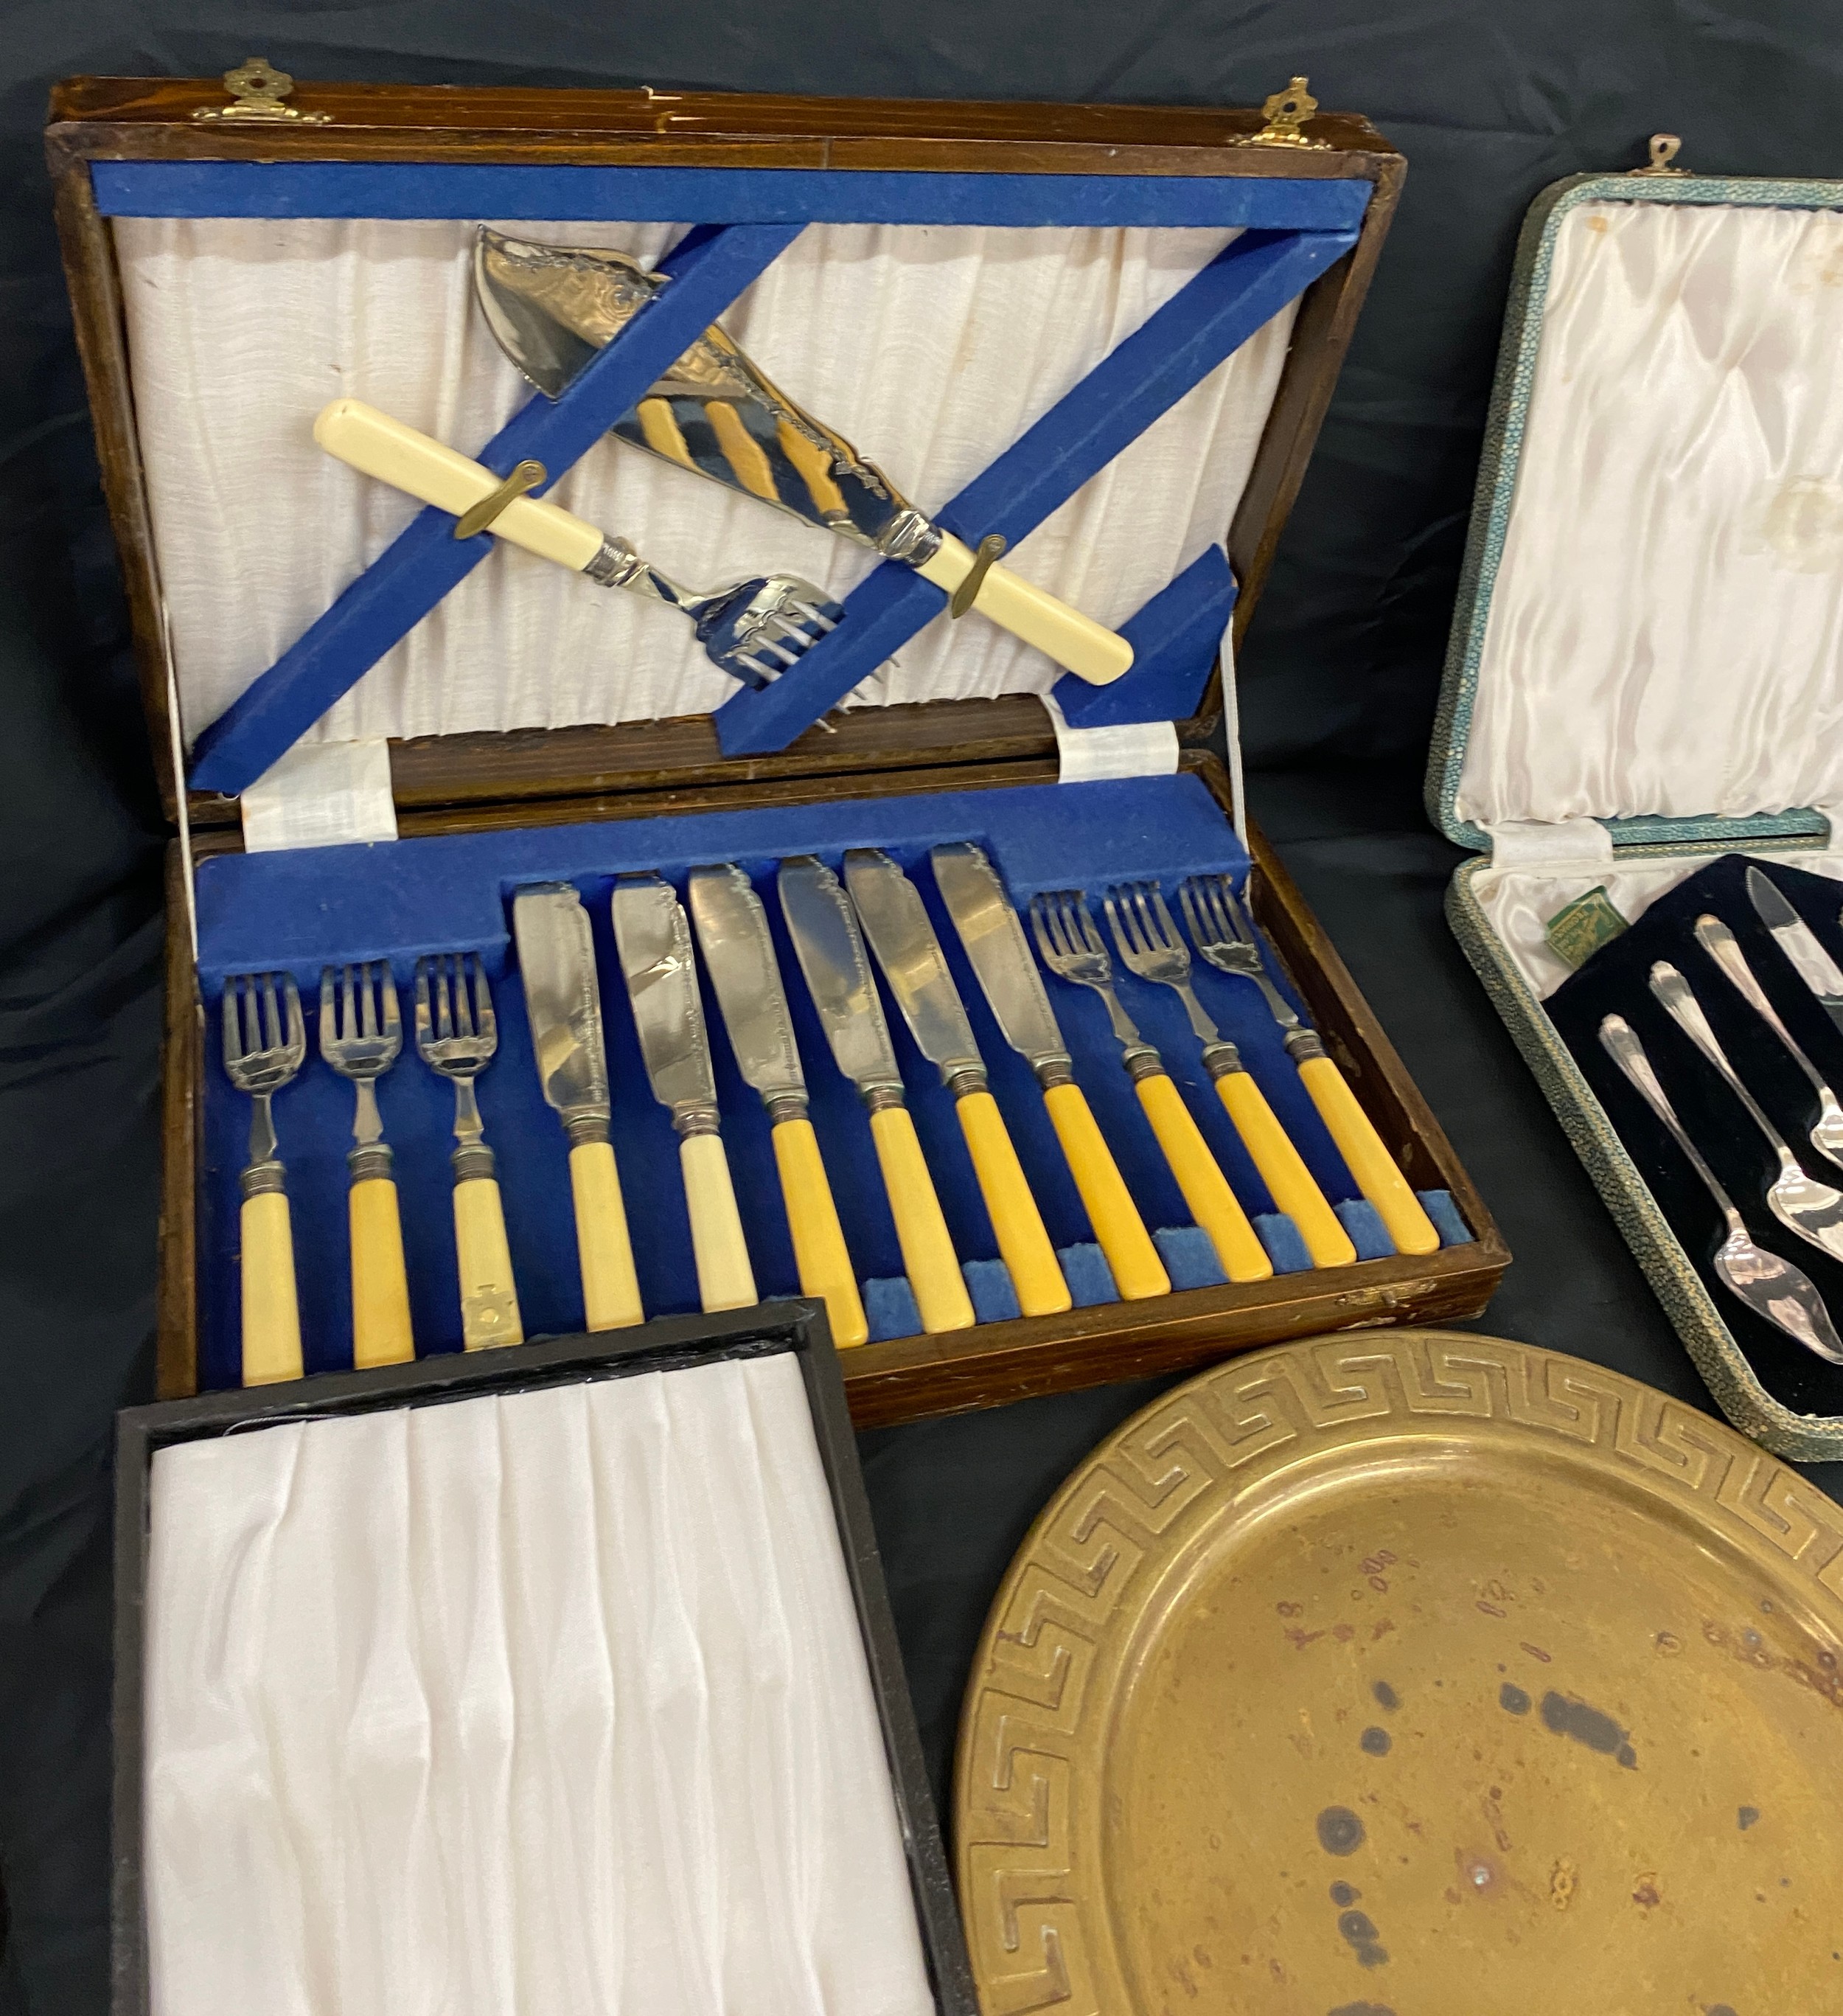 3 cased silver plated cutlery sets, 2 silver plated small small circular trays, 1 brass tray - Image 3 of 5